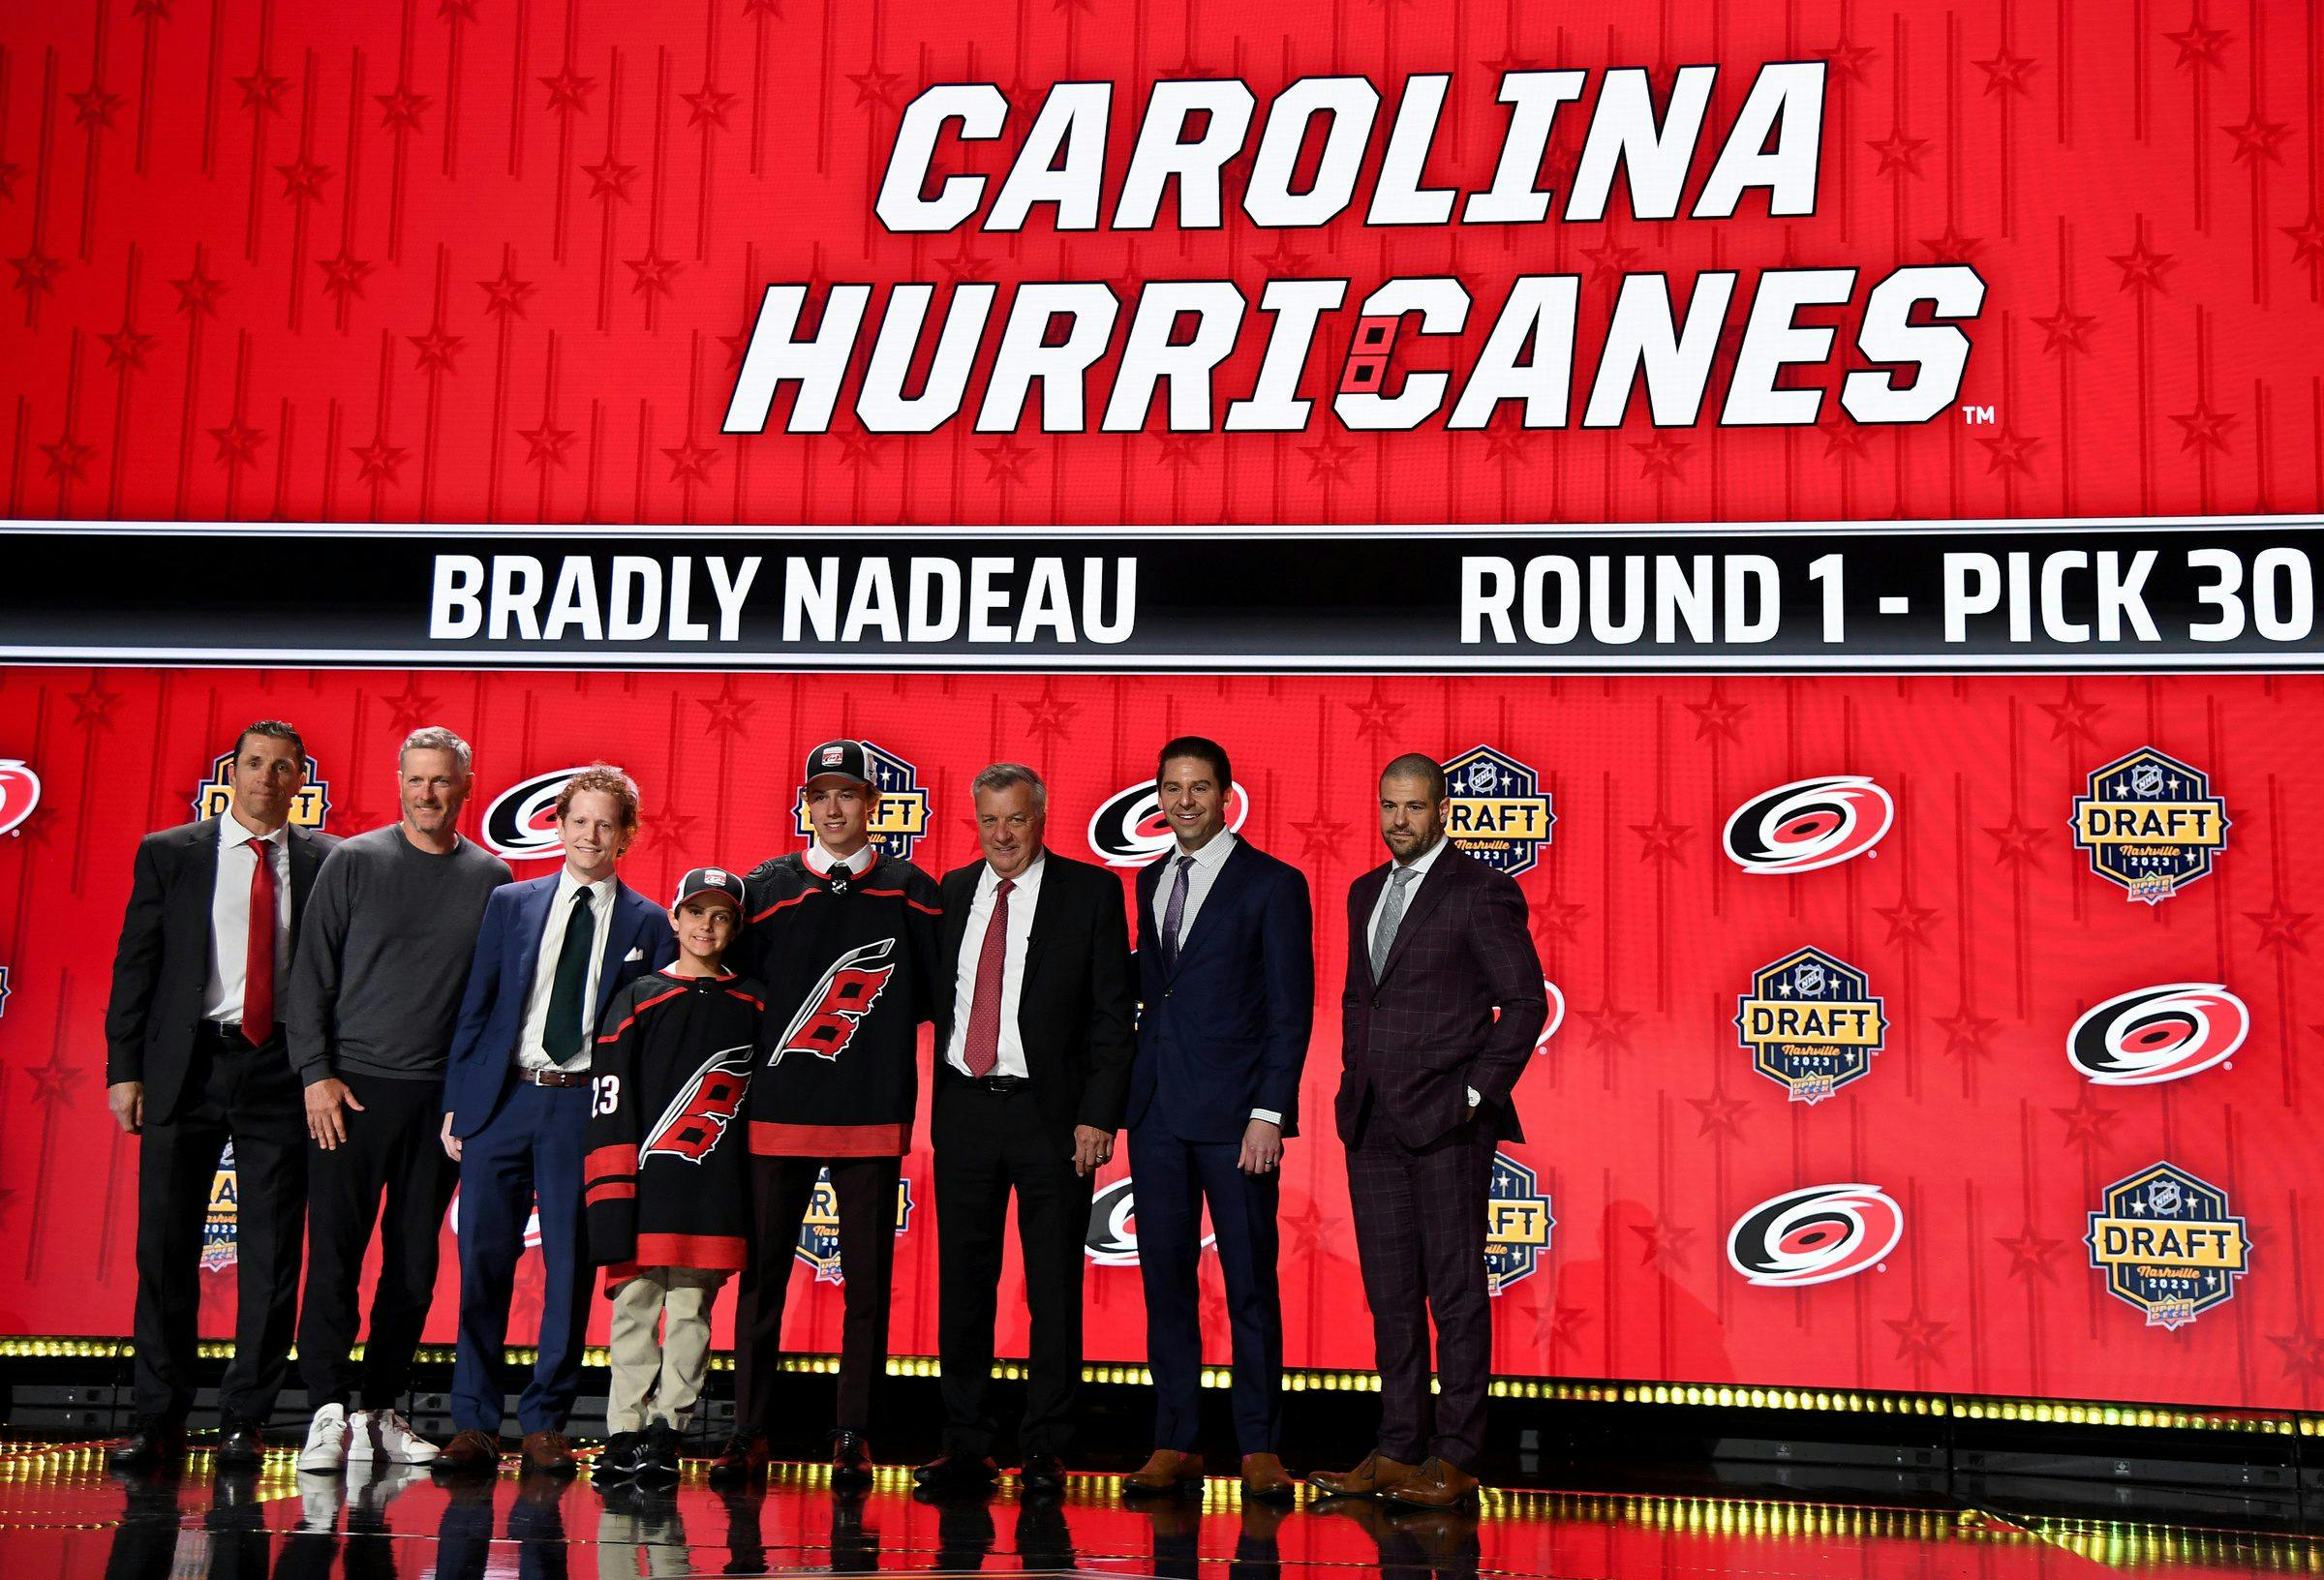 A good NHL lineup with quality incoming prospects? The Carolina Hurricanes are double-dipping